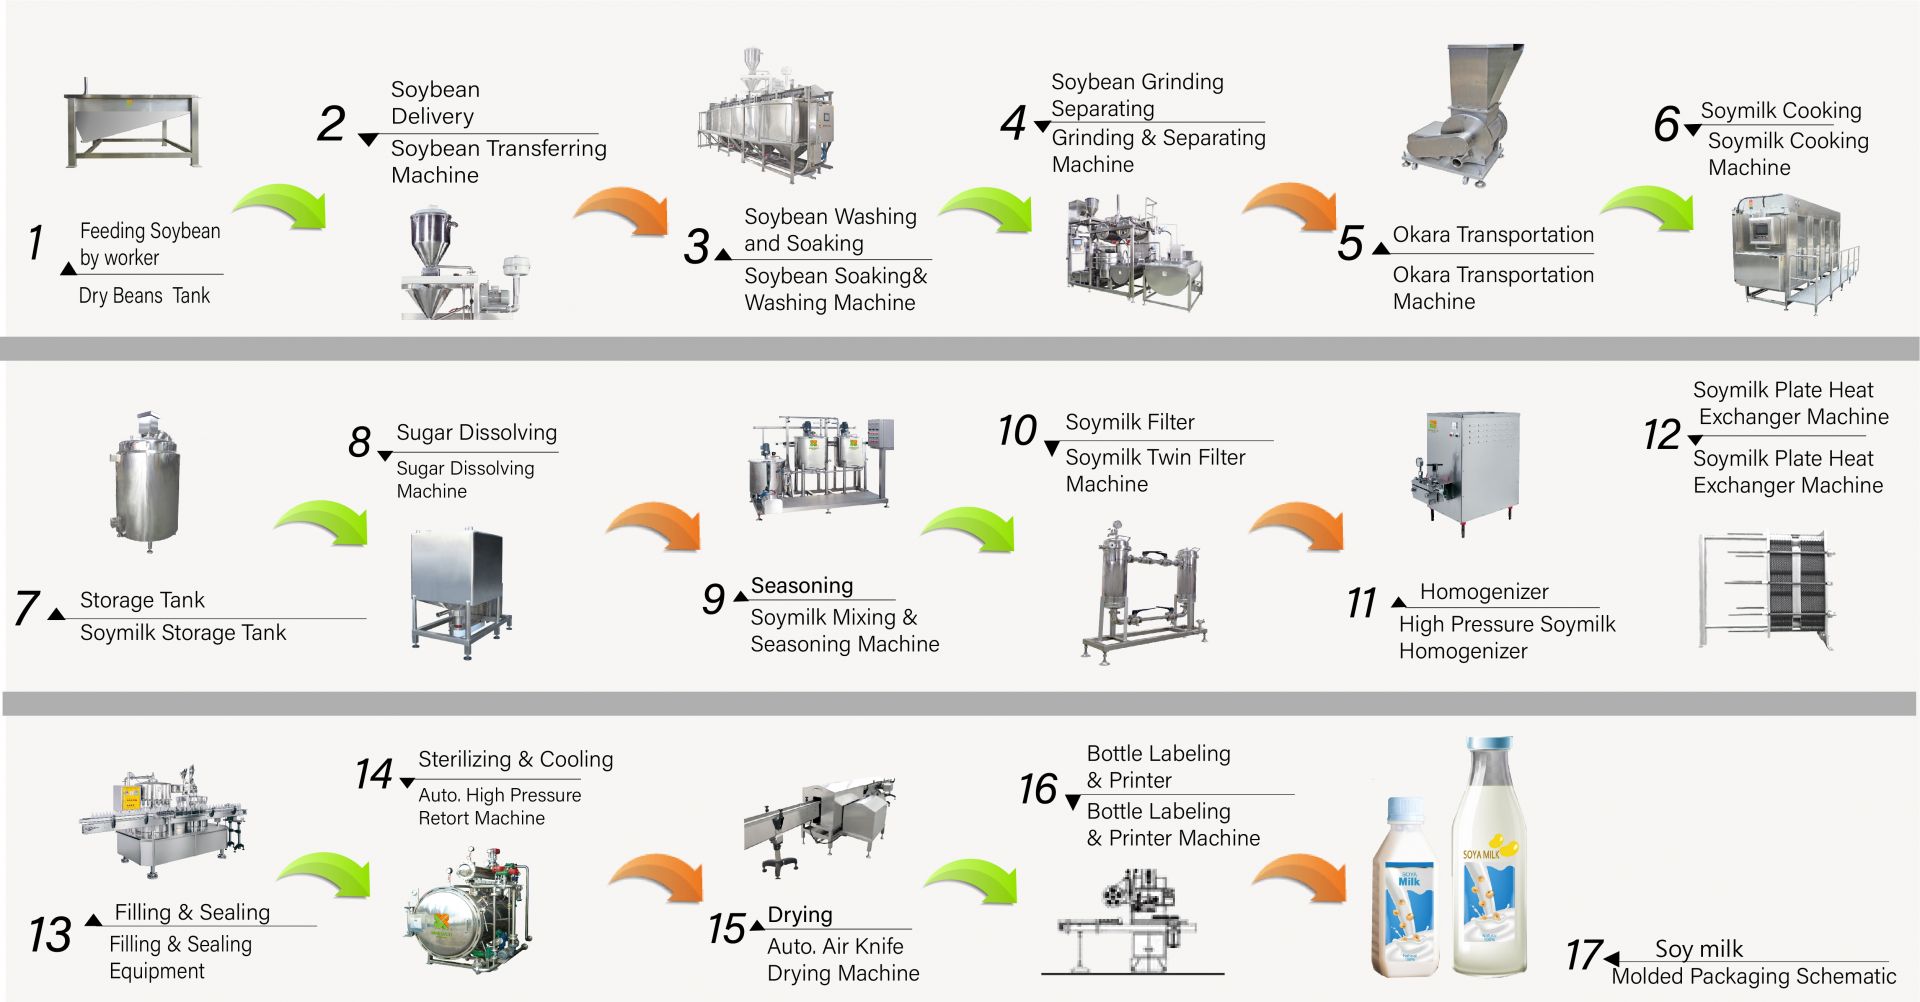 The process of making soy milk in the factory, How to make soy milk, Produce soy milk, soy milk flow chart, Soy milk making process, soy milk manufacturing process, soy milk process, soy milk process flow chart, Soy milk processing flow, Soy milk processing process, soy milk production, soy milk production flow chart, soy milk production process, soybean processing flow chart, Automatic soybean milk machine, Automatic soybean milk making machine, Easy Tofu Maker, Industrial production of soy milk, Industrial soy milk manufacturing, Industrial soymilk machine, Industrial tofu machine, plant milk machine, Plant milk production machine, production of soy milk, Soy Beverages Machine, Soy Beverages Production Line, Soy Drink Machine, soy milk and tofu making commercial soy milk machine, soy milk and tofu making machine, Soy milk beverage machinery and equipment, Soy Milk Cooking Machine, soy milk factory, soy milk machine, soy milk machine commercial, Soy milk machine made in Taiwan, Soy milk machinery, Soy milk machinery and equipment, soy milk Maker, Soy milk making machine, soy milk manufacturers, Soy milk production, soy milk production equipment, Soy milk production factory, Soy Milk Production Line, soya milk making machine price, soybean processing machine, soymilk factory, soymilk machine